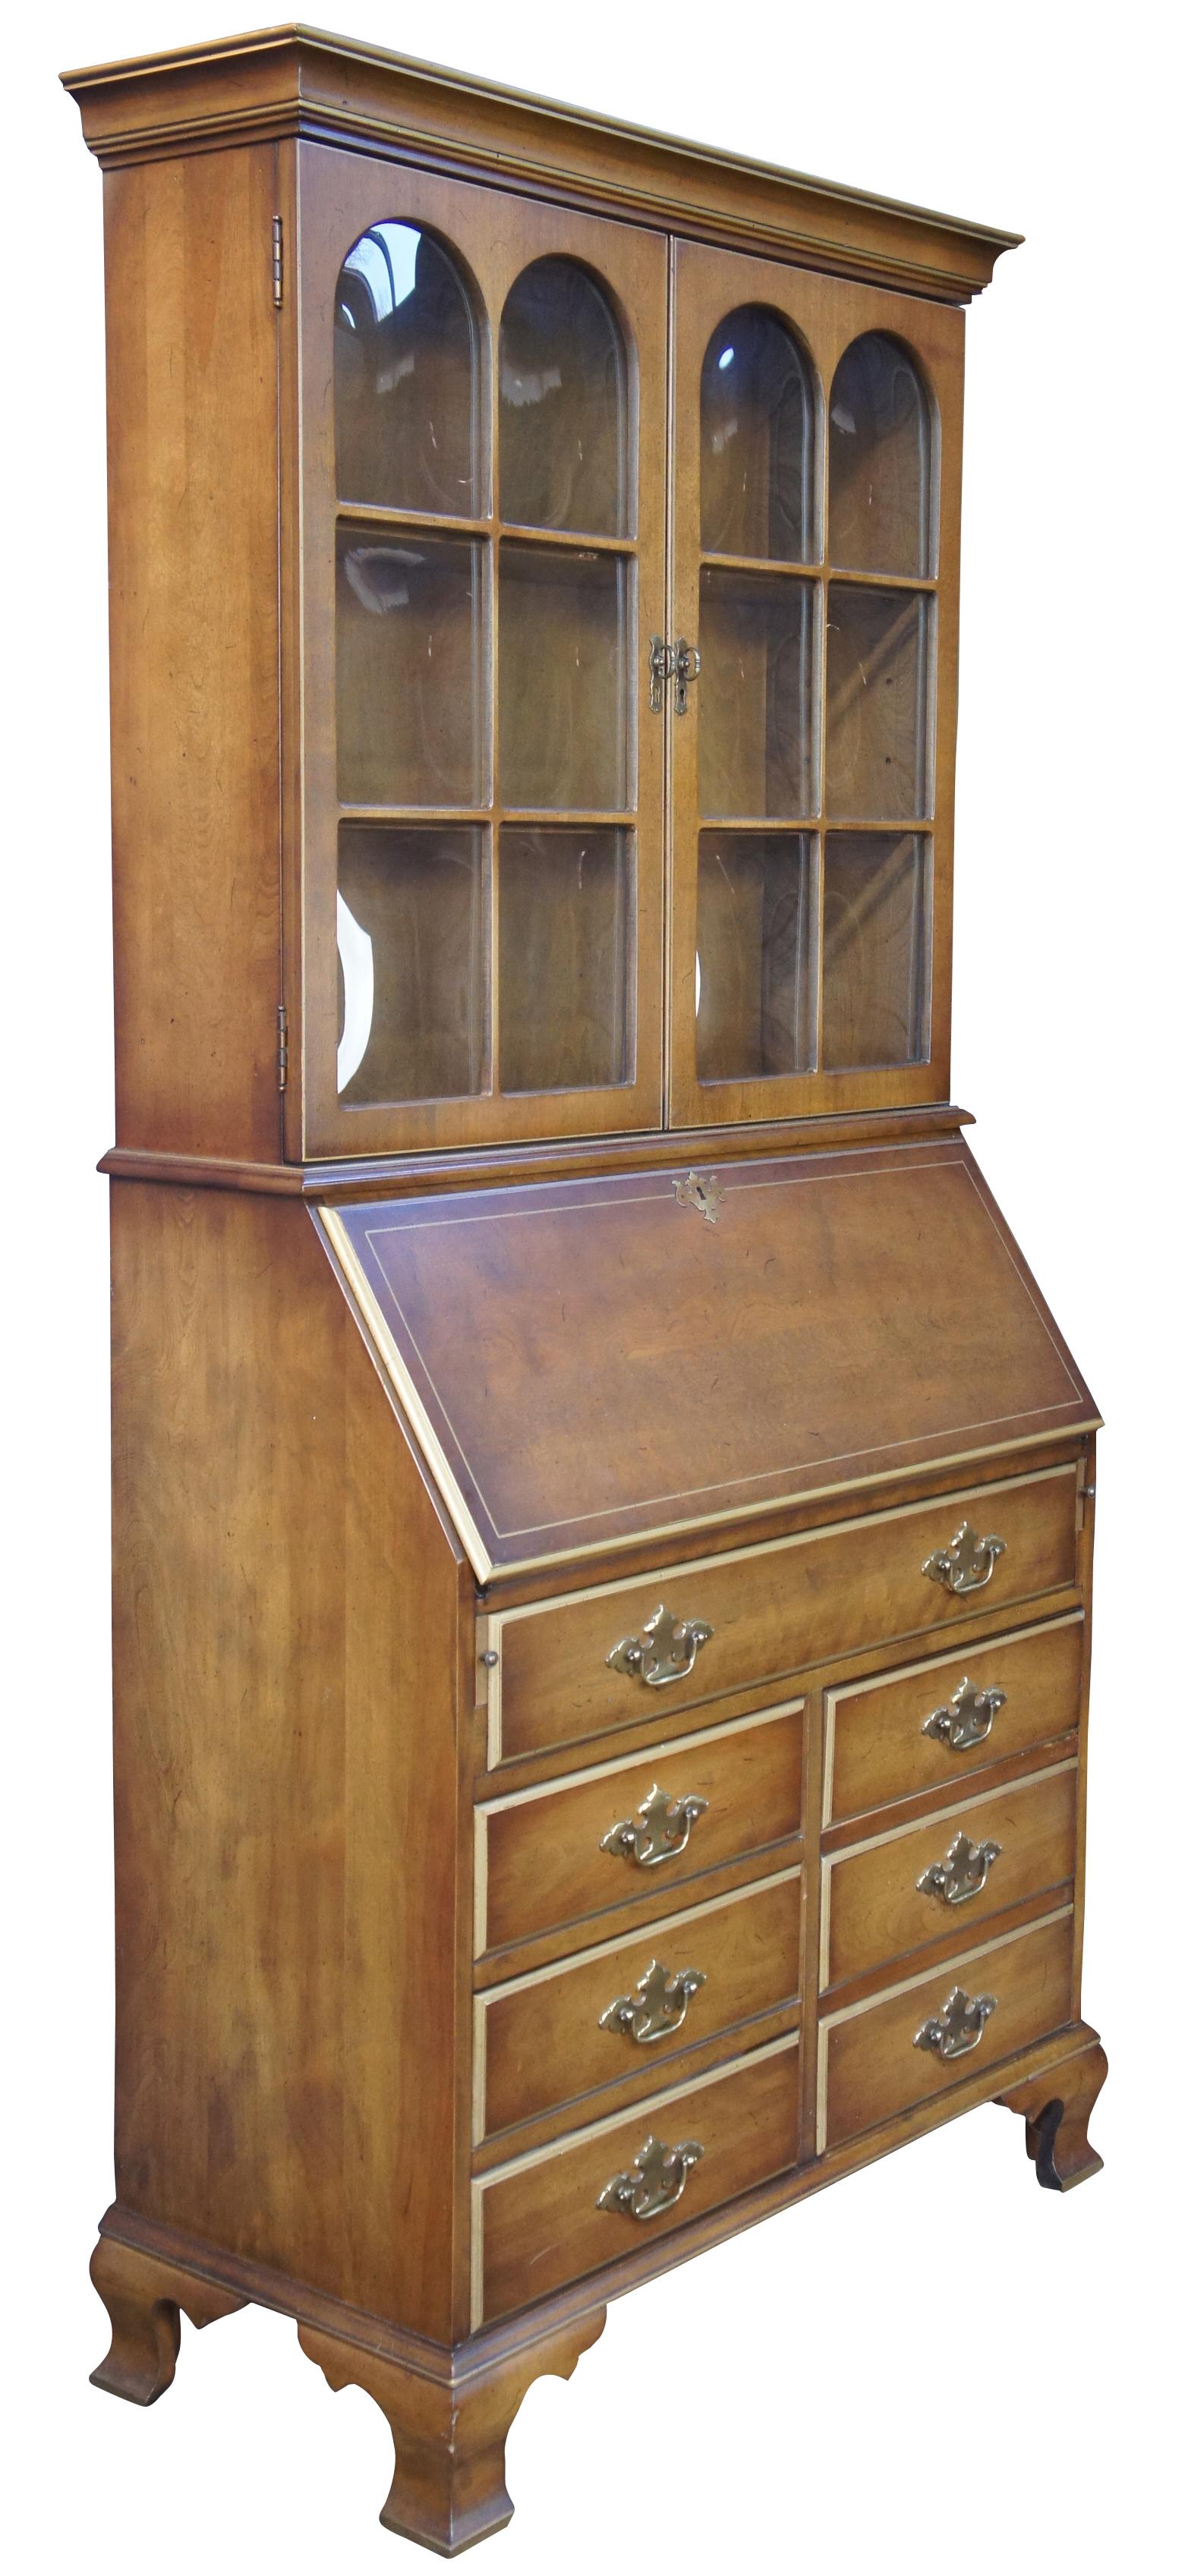 Vintage library secretary desk with bubble glass bookcase, circa 1970s/1980s. Inspired by a blend of Georgian and Federal Styling. Made of walnut featuring five drawers including one large file storage and a drop front secretary that opens to more